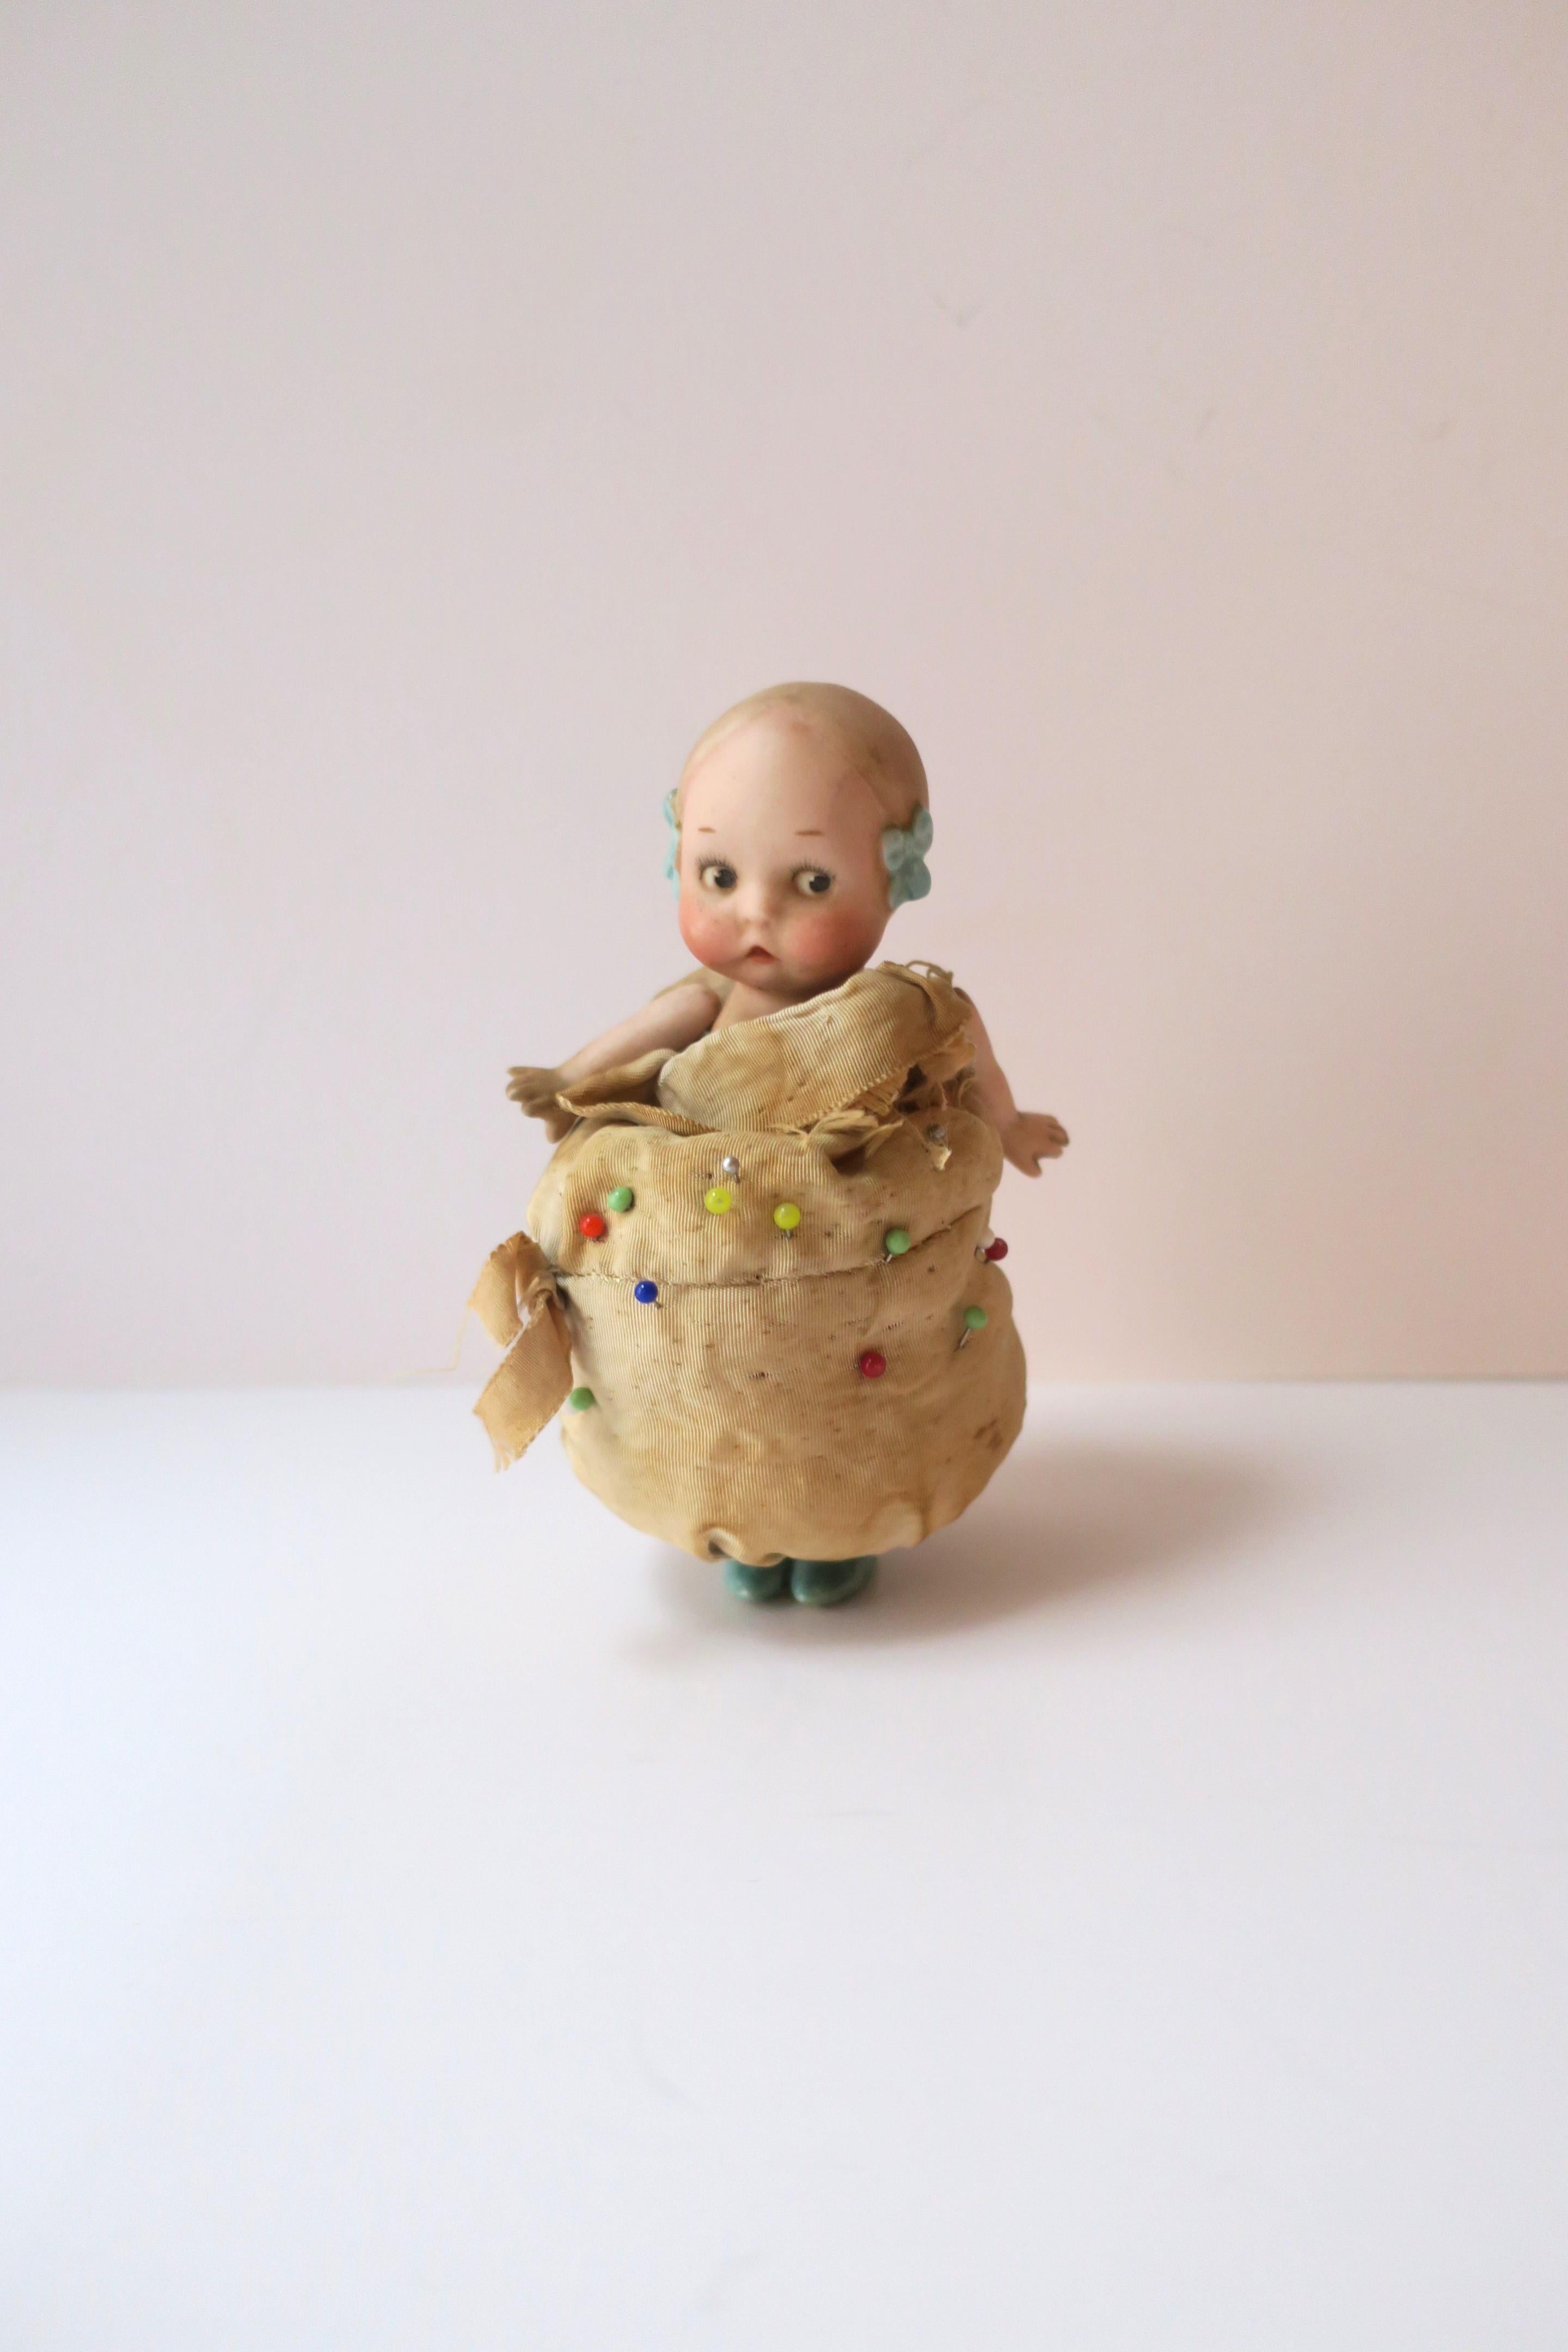 A porcelain little girl doll pin cushion, circa early-20th century. This porcelain doll, with pin cushion dress, is shown with beautiful face, rosey cheeks, baby blue bows in hair, one on each side, finished with blue shoes. Dimensions: 4.75